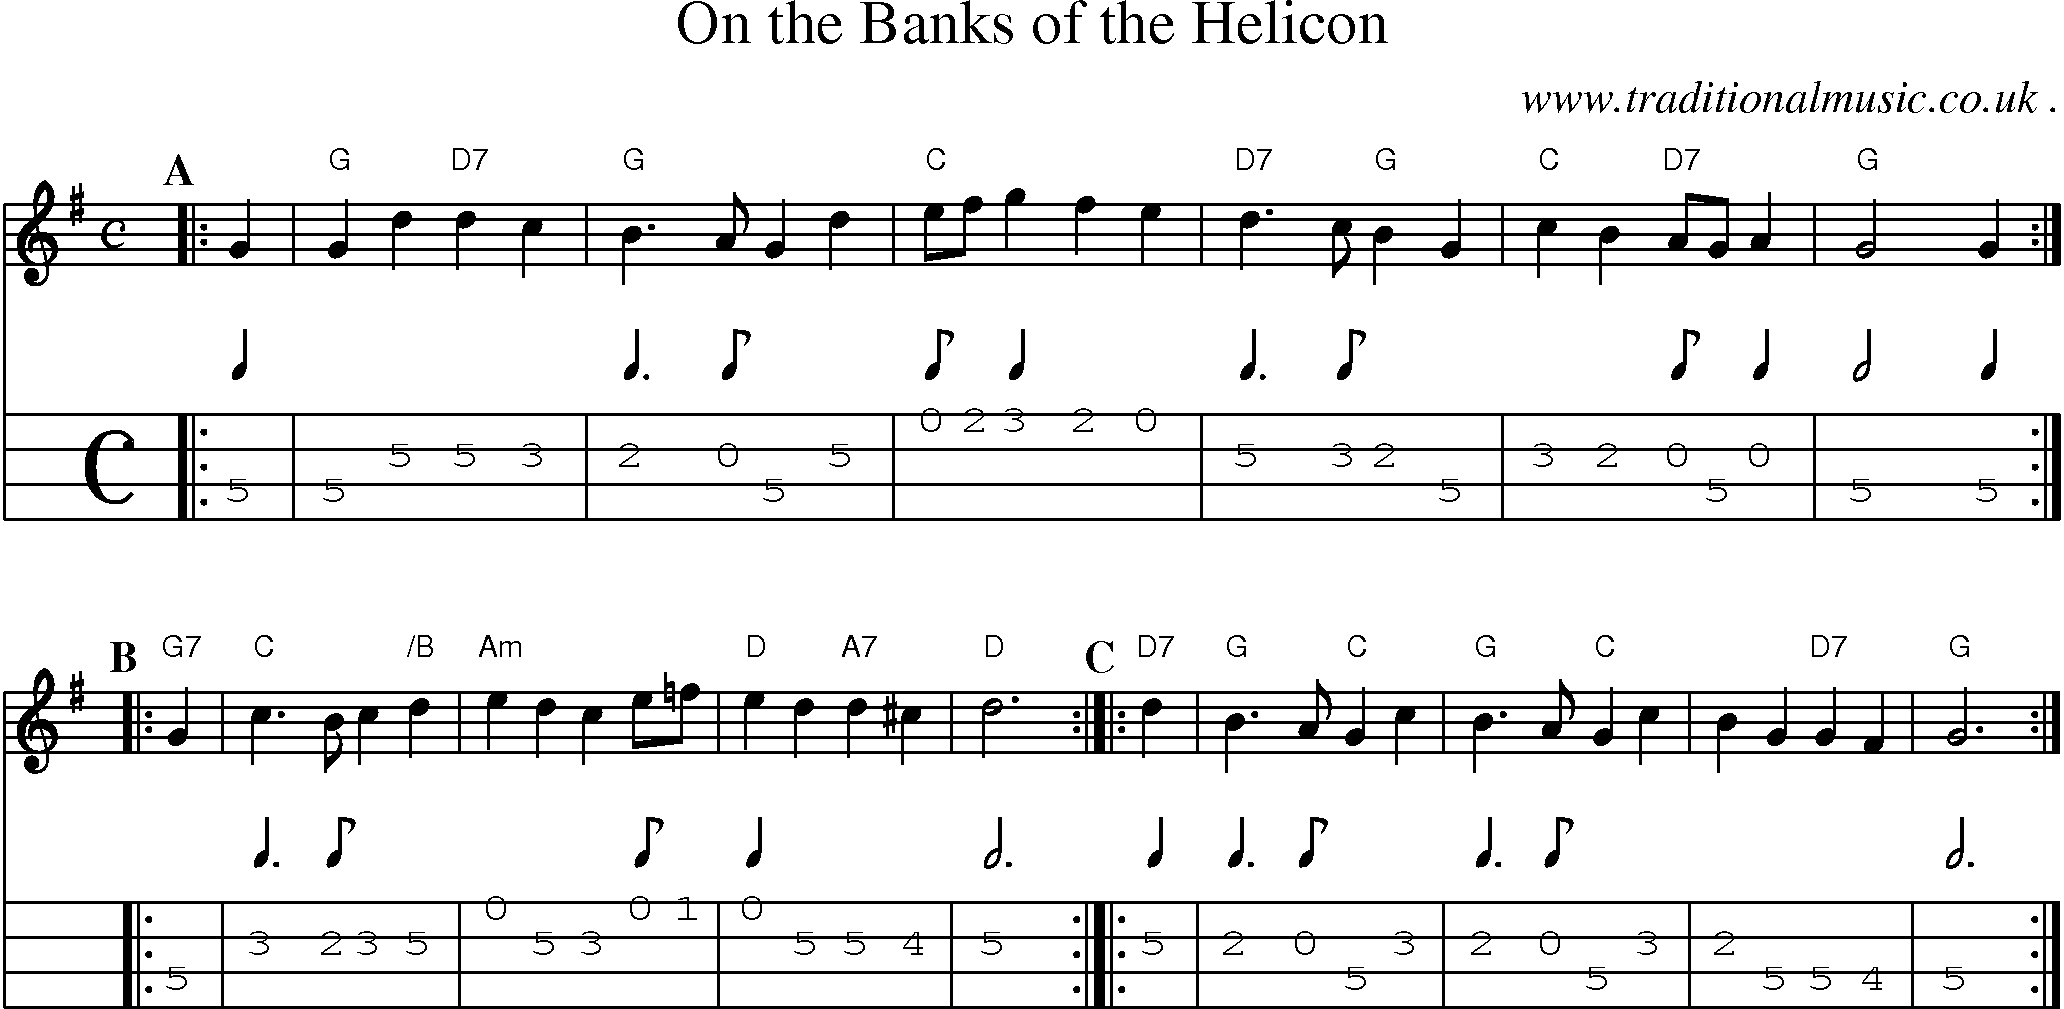 Sheet-music  score, Chords and Mandolin Tabs for On The Banks Of The Helicon